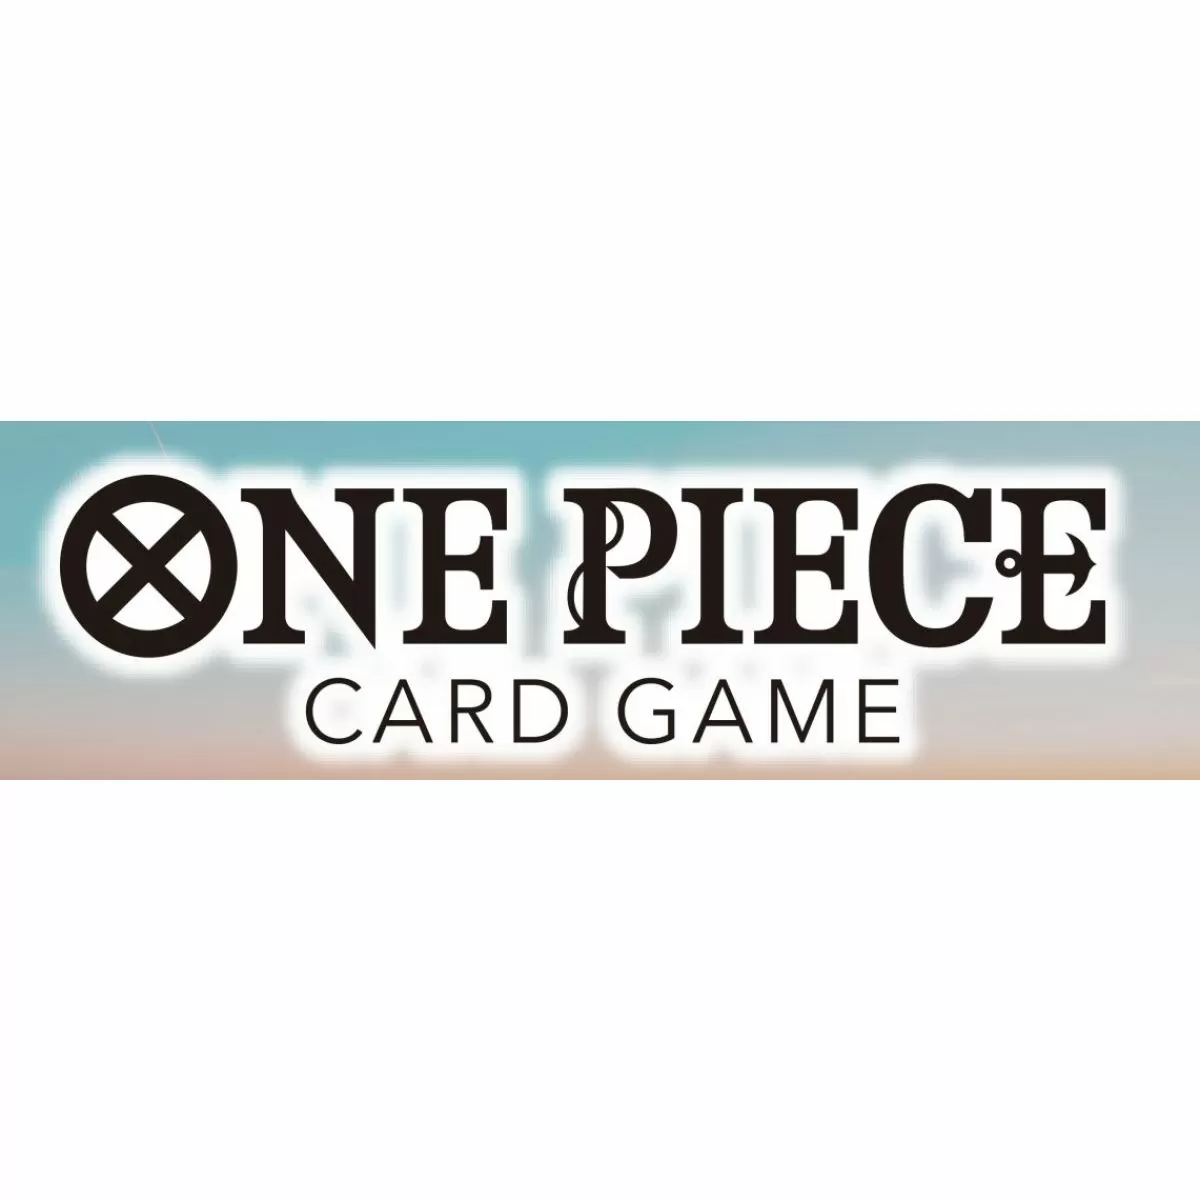 One Piece Card Game Official Sleeves Set 6 (70) (Preorder)